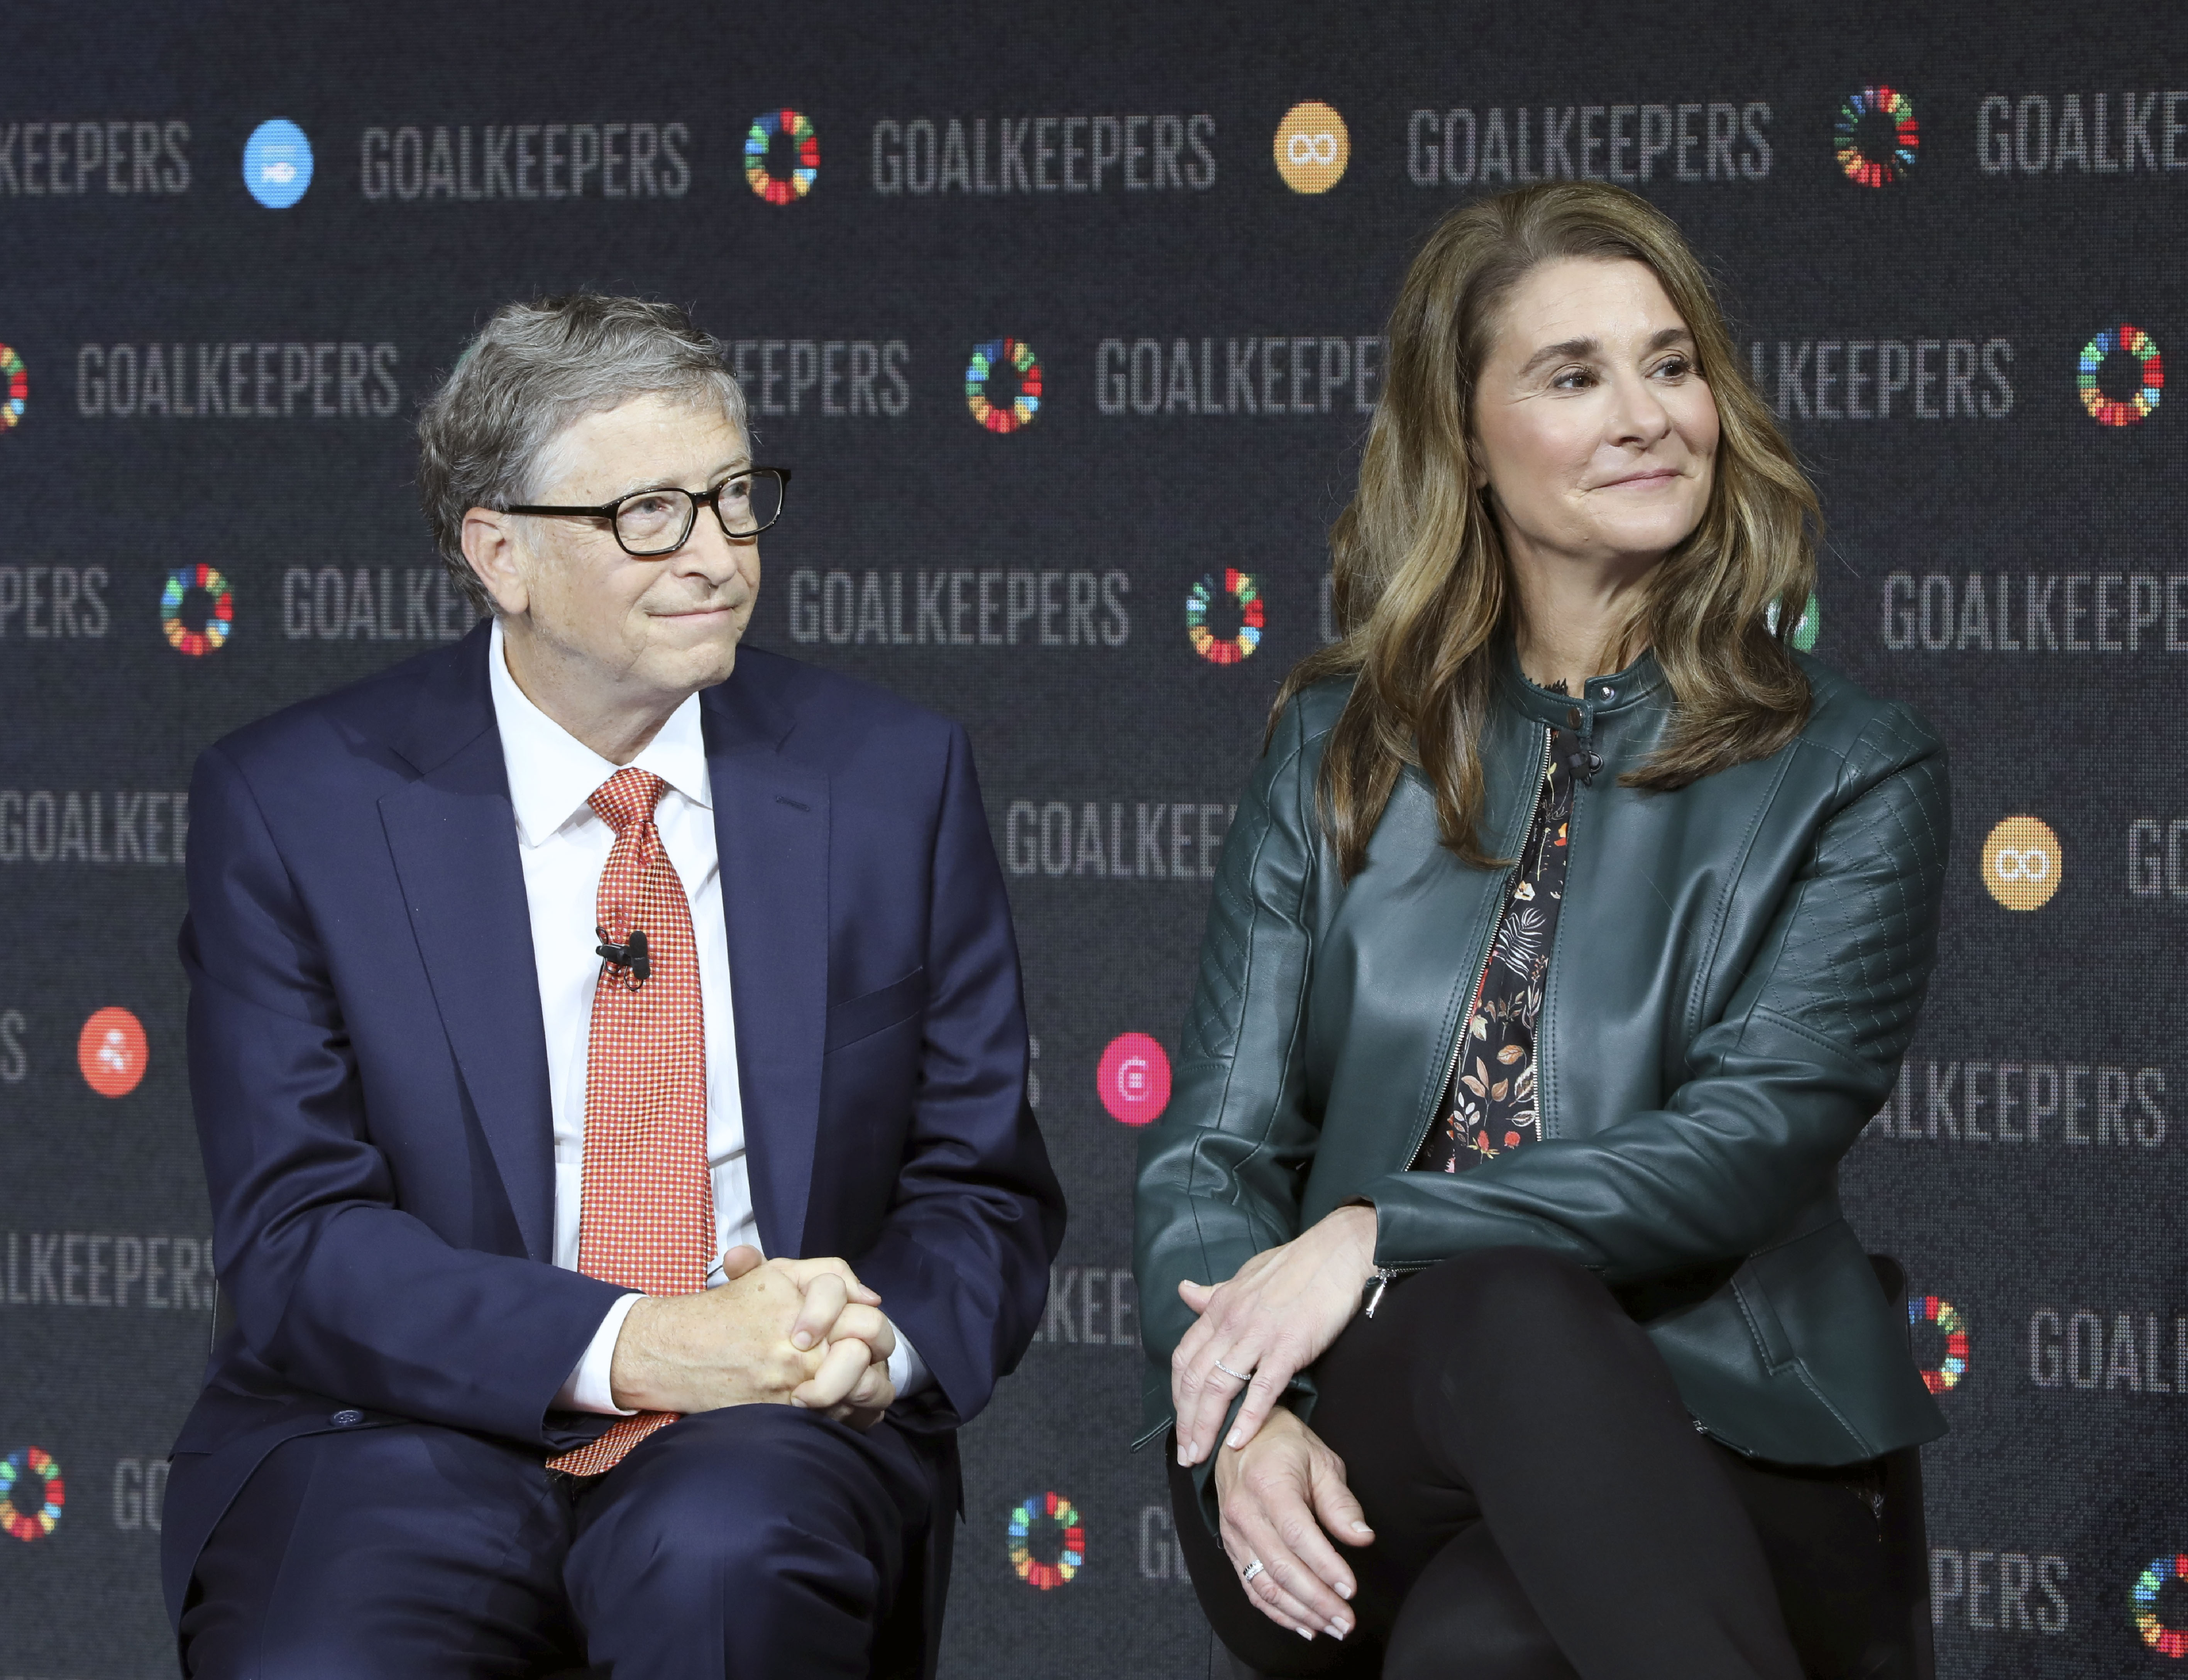 Bill Gates in a suit and Melinda Gates in a green jacket and black pants at Goalkeepers event in NYC